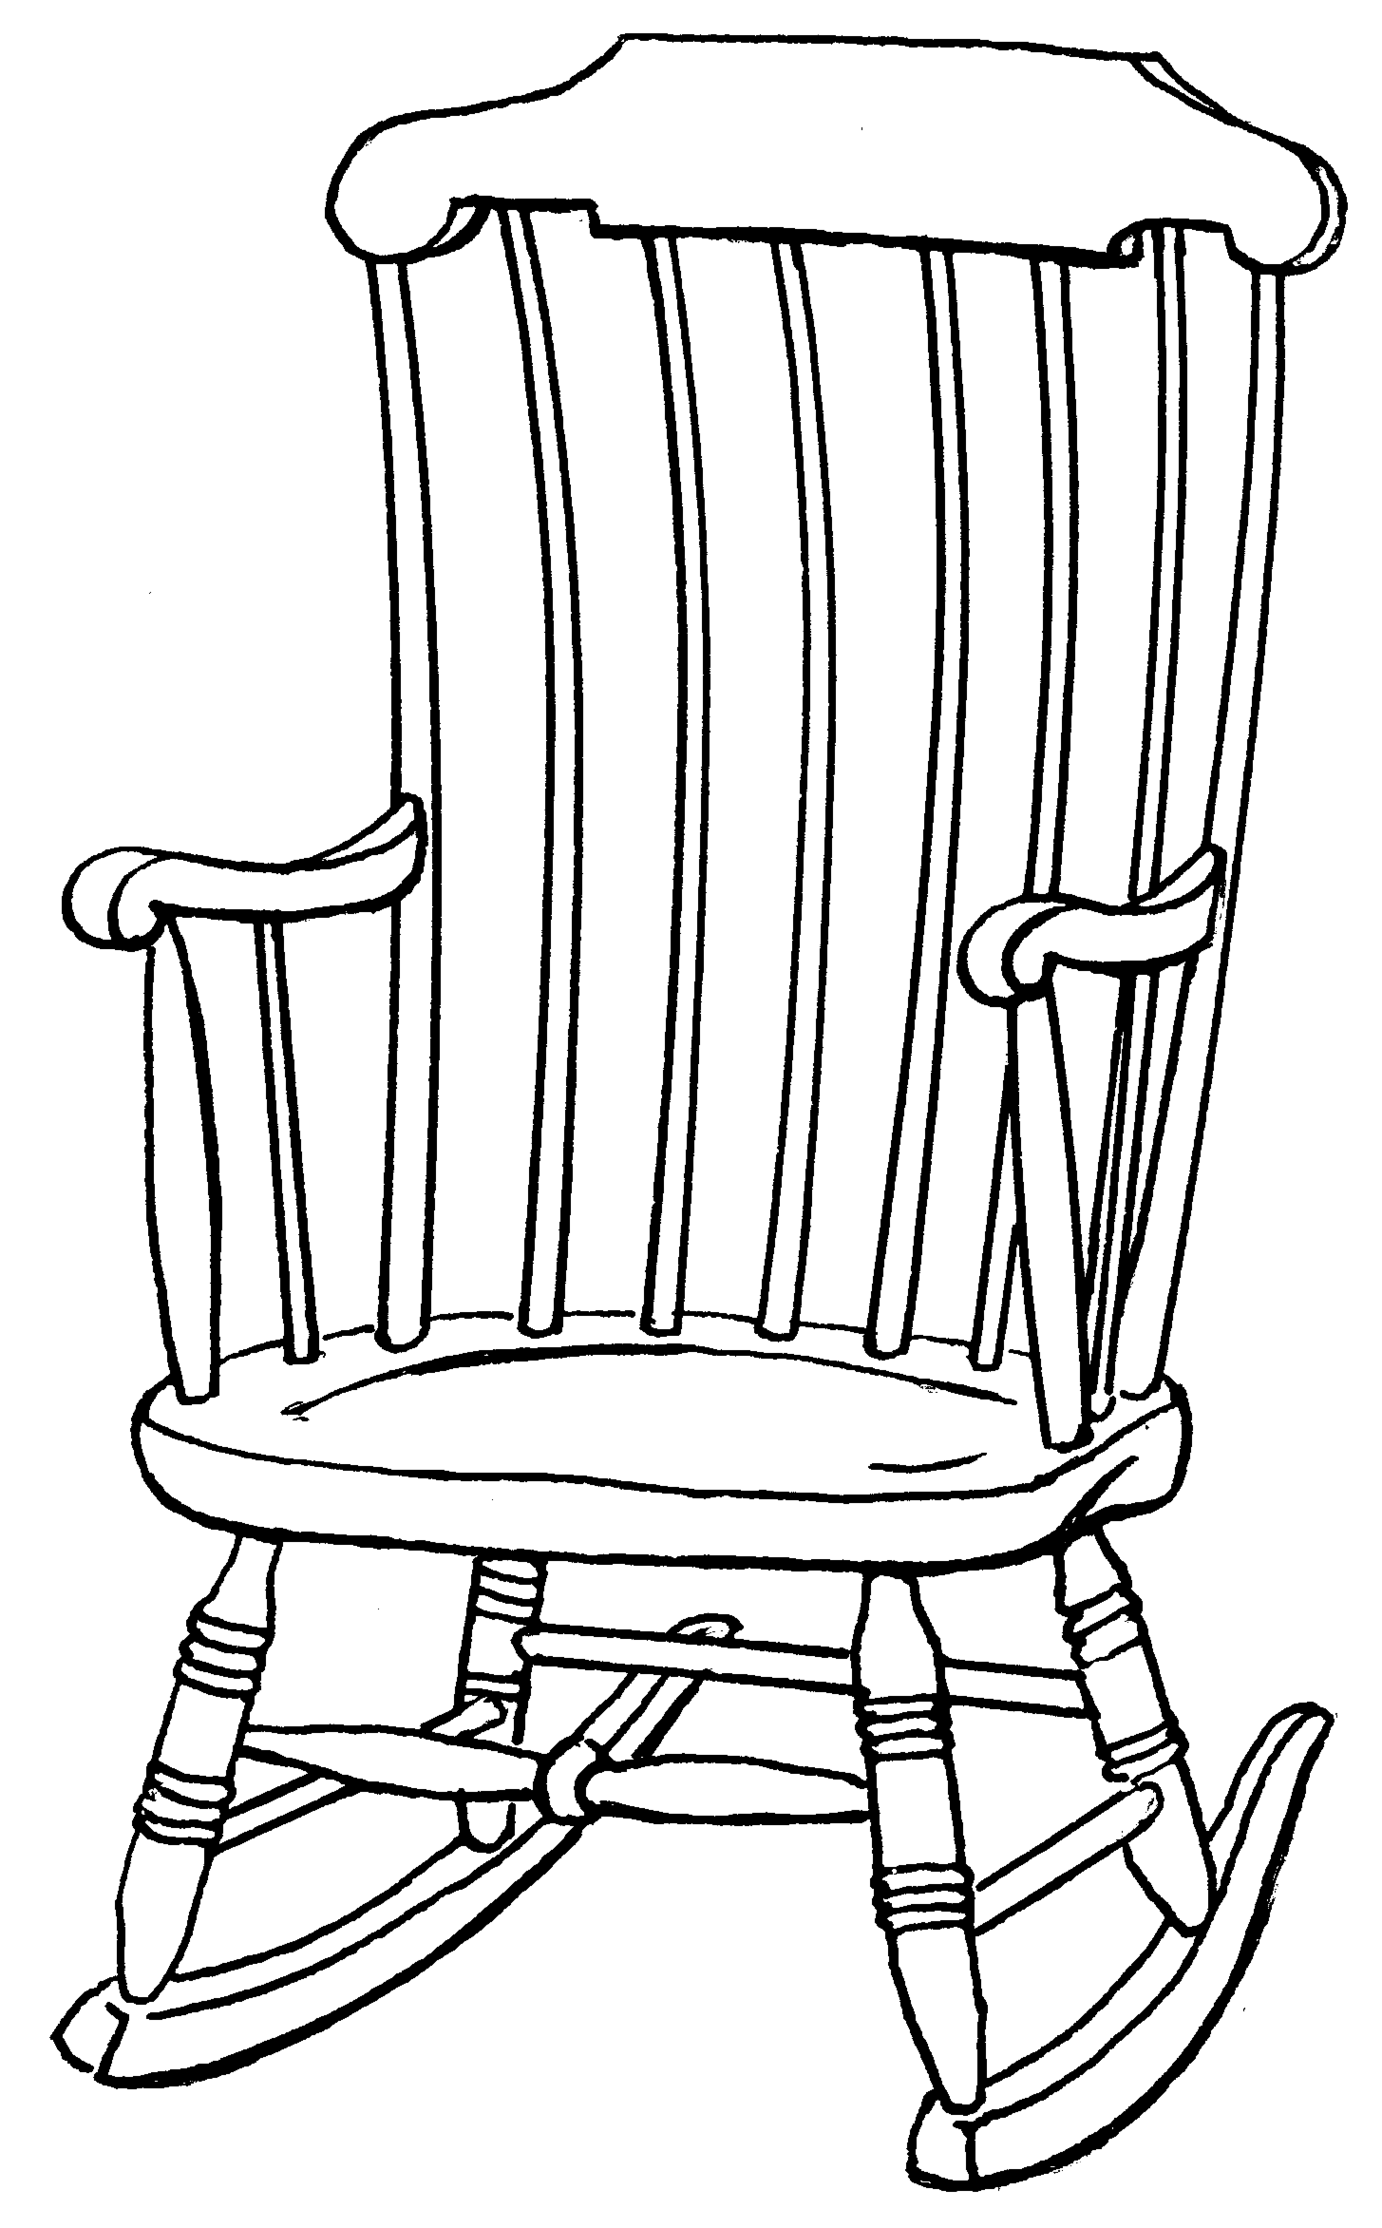 Drawings Of Chairs Colouring Pages Clipart - Free to use Clip Art ...